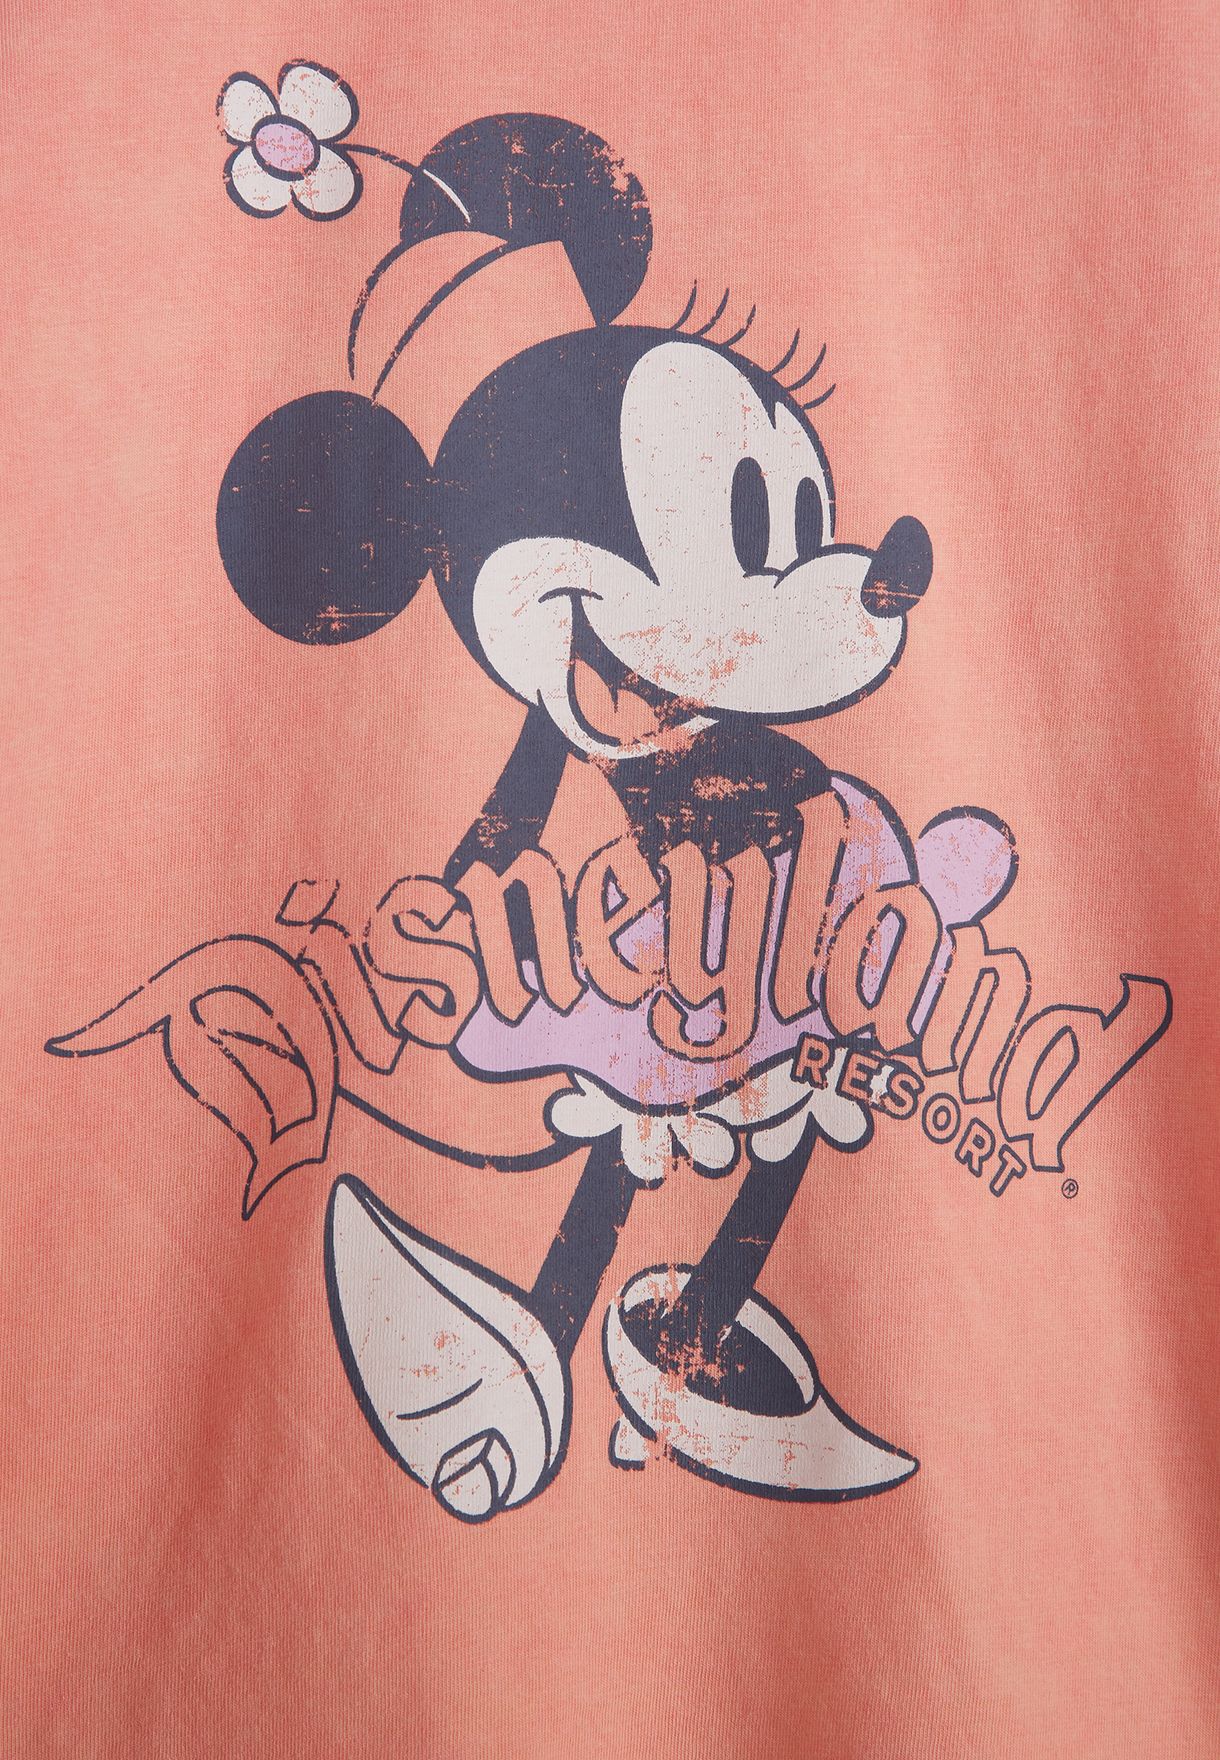 Youth Minnie Mouse T-Shirt